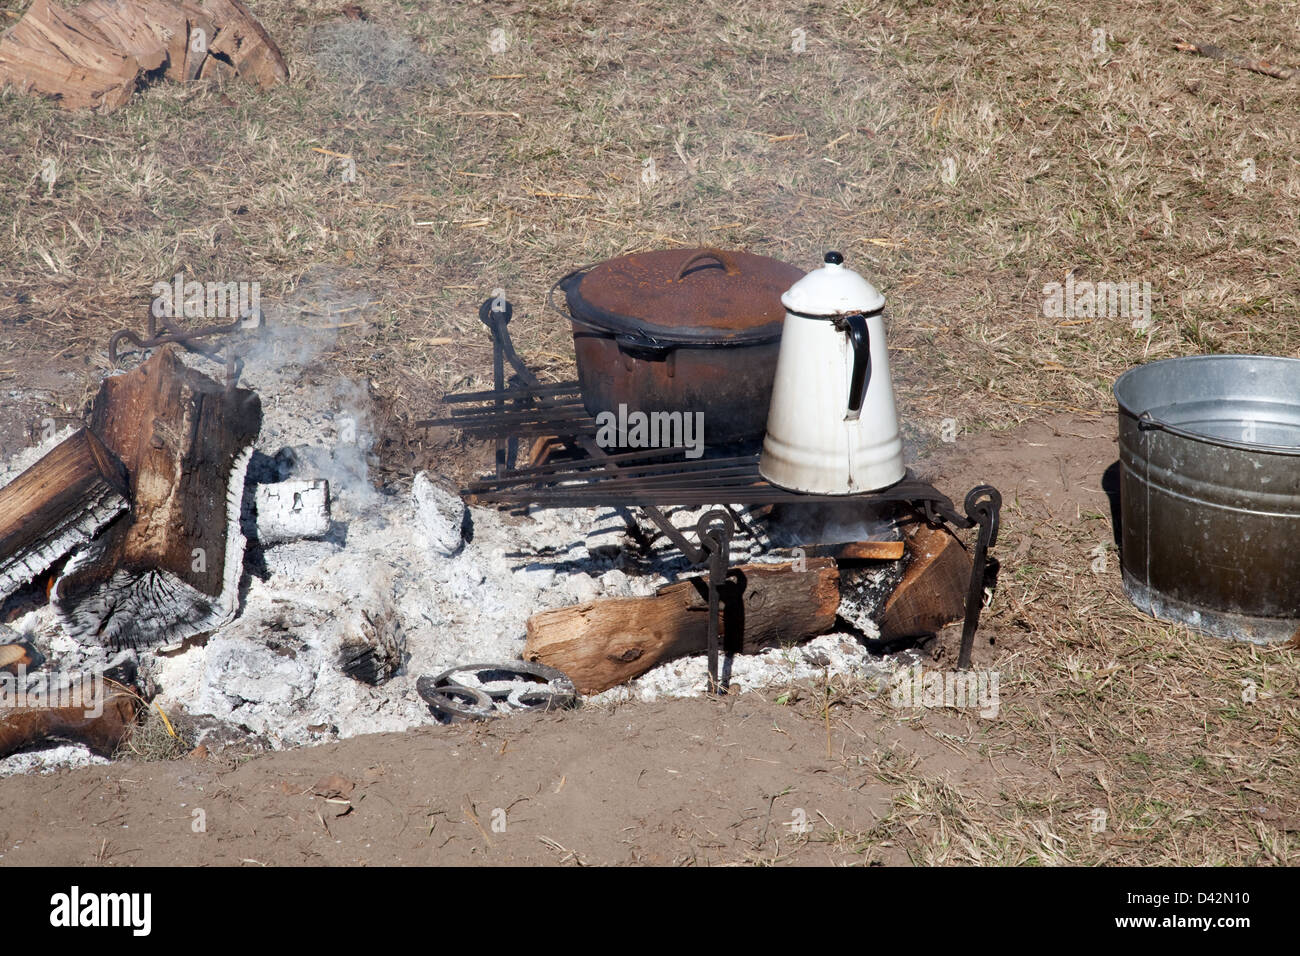 Breakfast on an open fire, with cast iron skillet and coffee pot Stock Photo